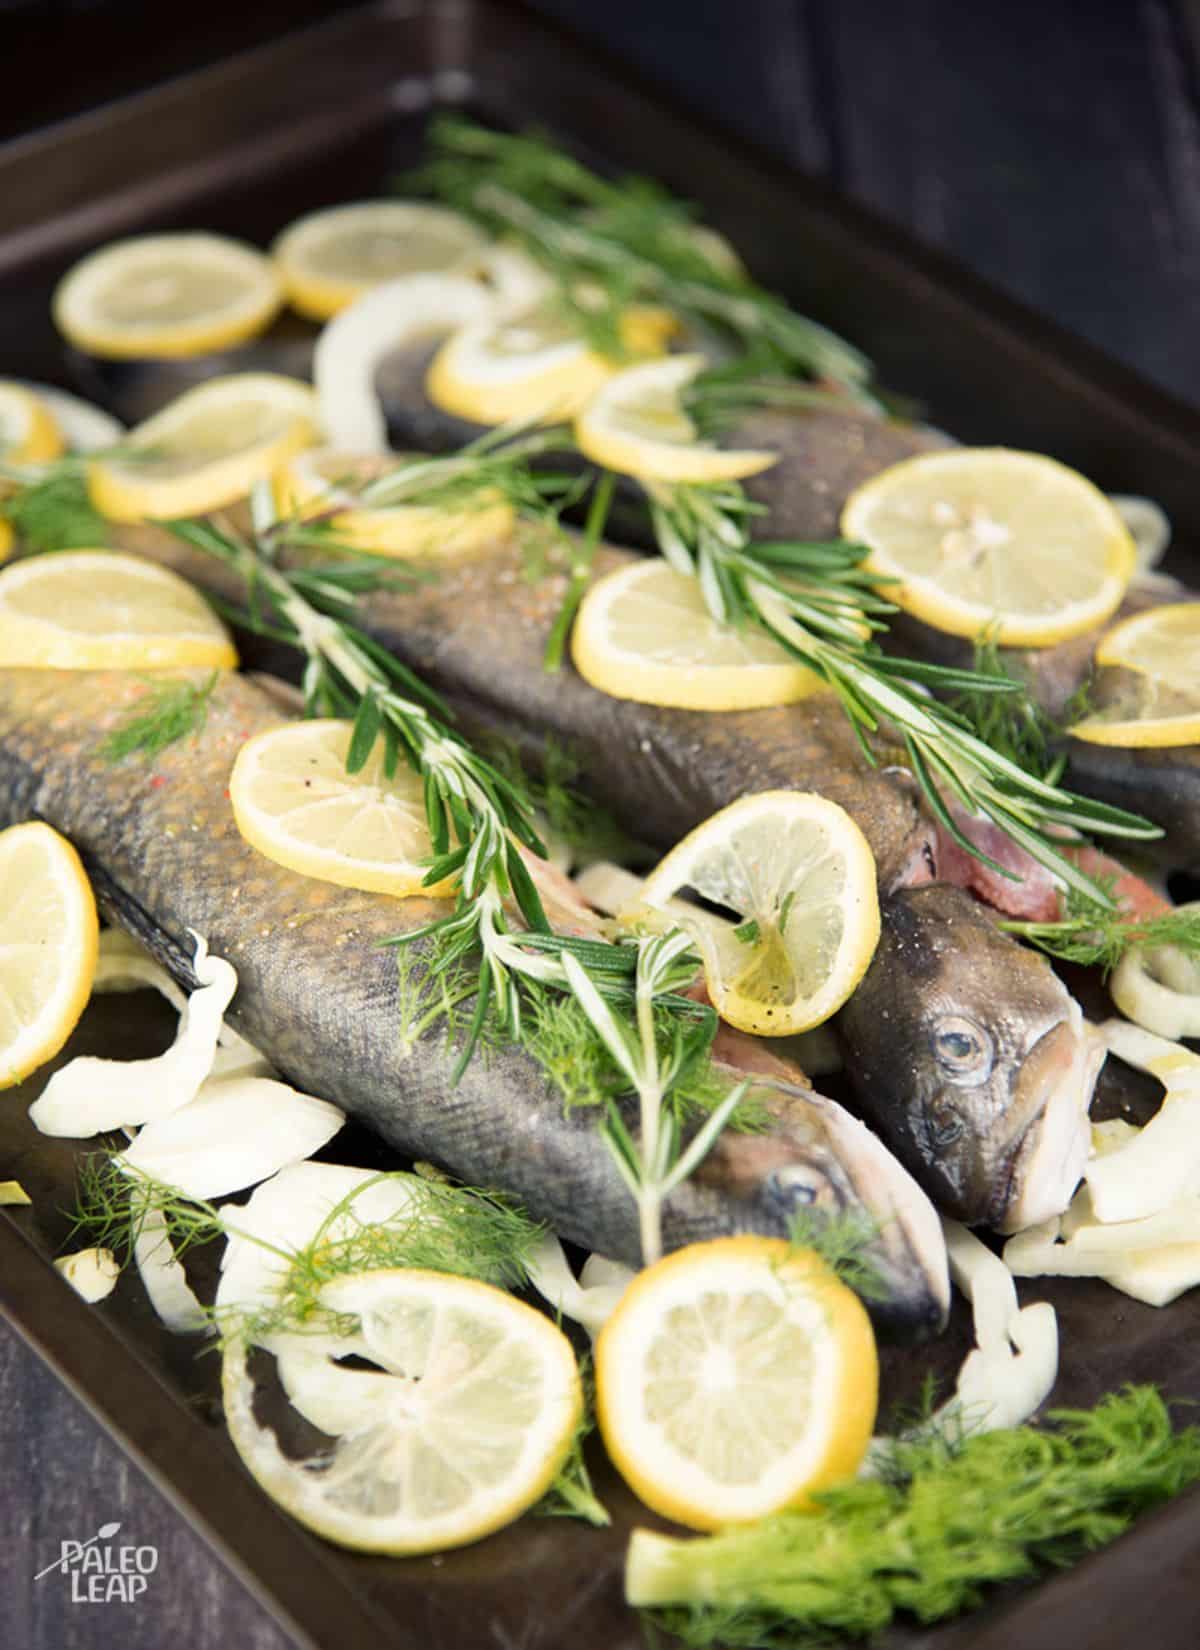 Fennel and Lemon Roasted Trout Recipe Preparation